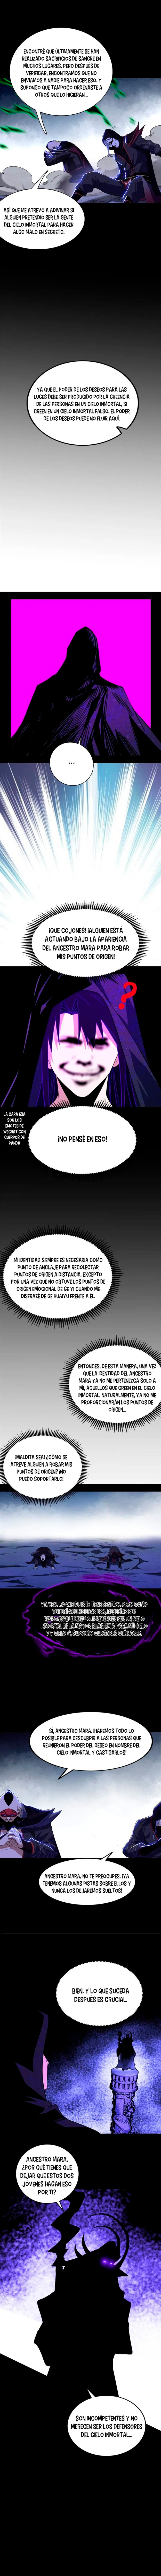 Manga Soy un dios maligno Chapter 320 image number 8